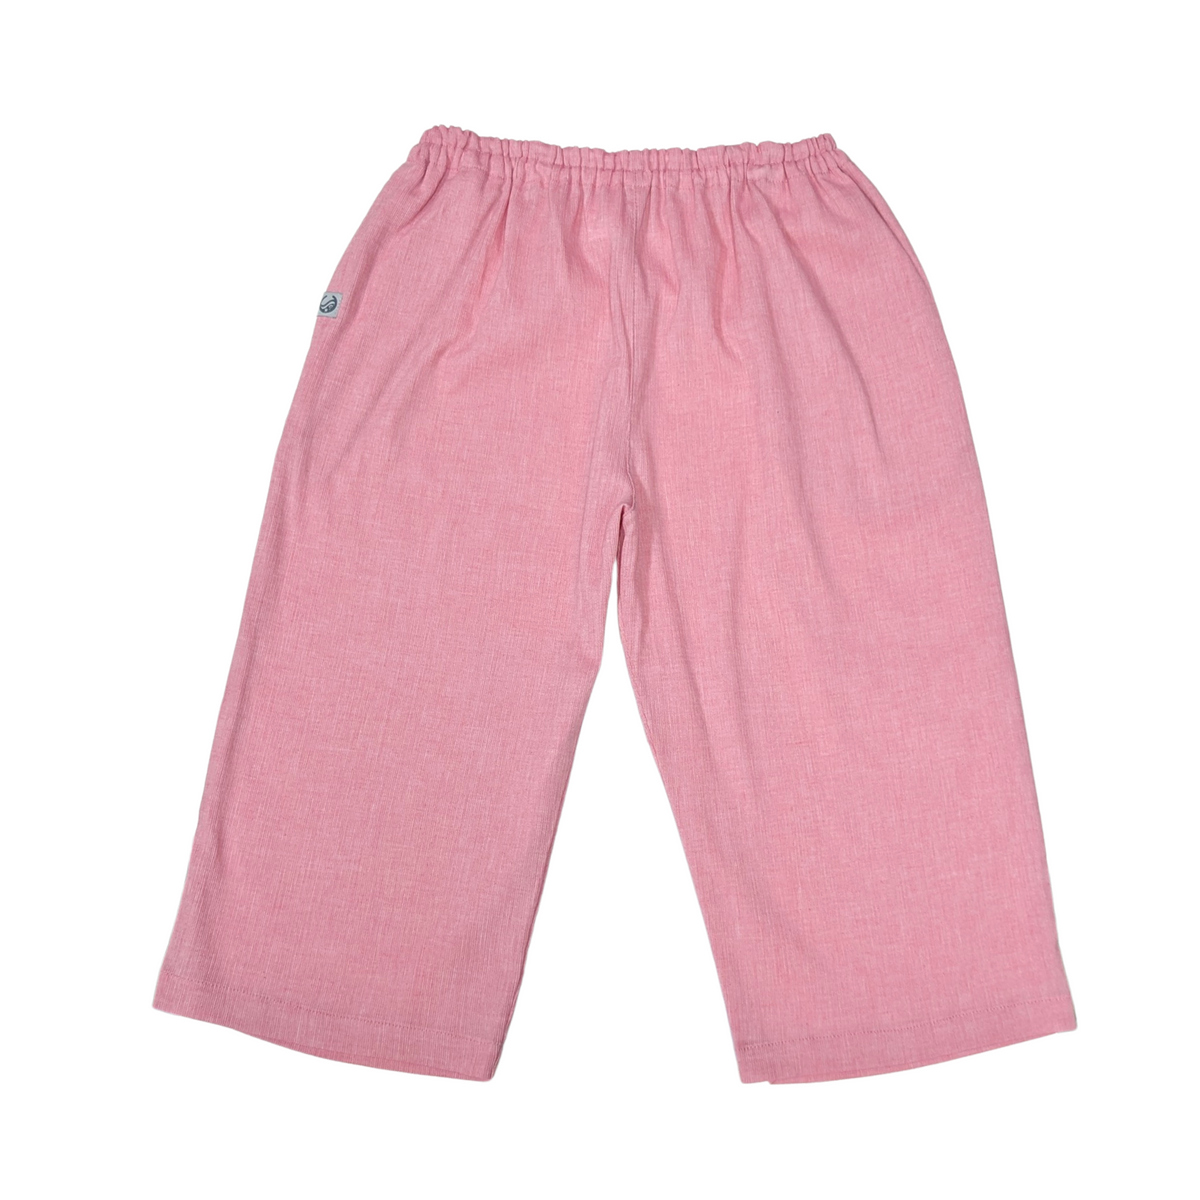 Cool, Stretchy, Comfy Lounge Pants | Unisex | Solid Color | Pink, Navy, Gray - CHERRYSTONEstyle